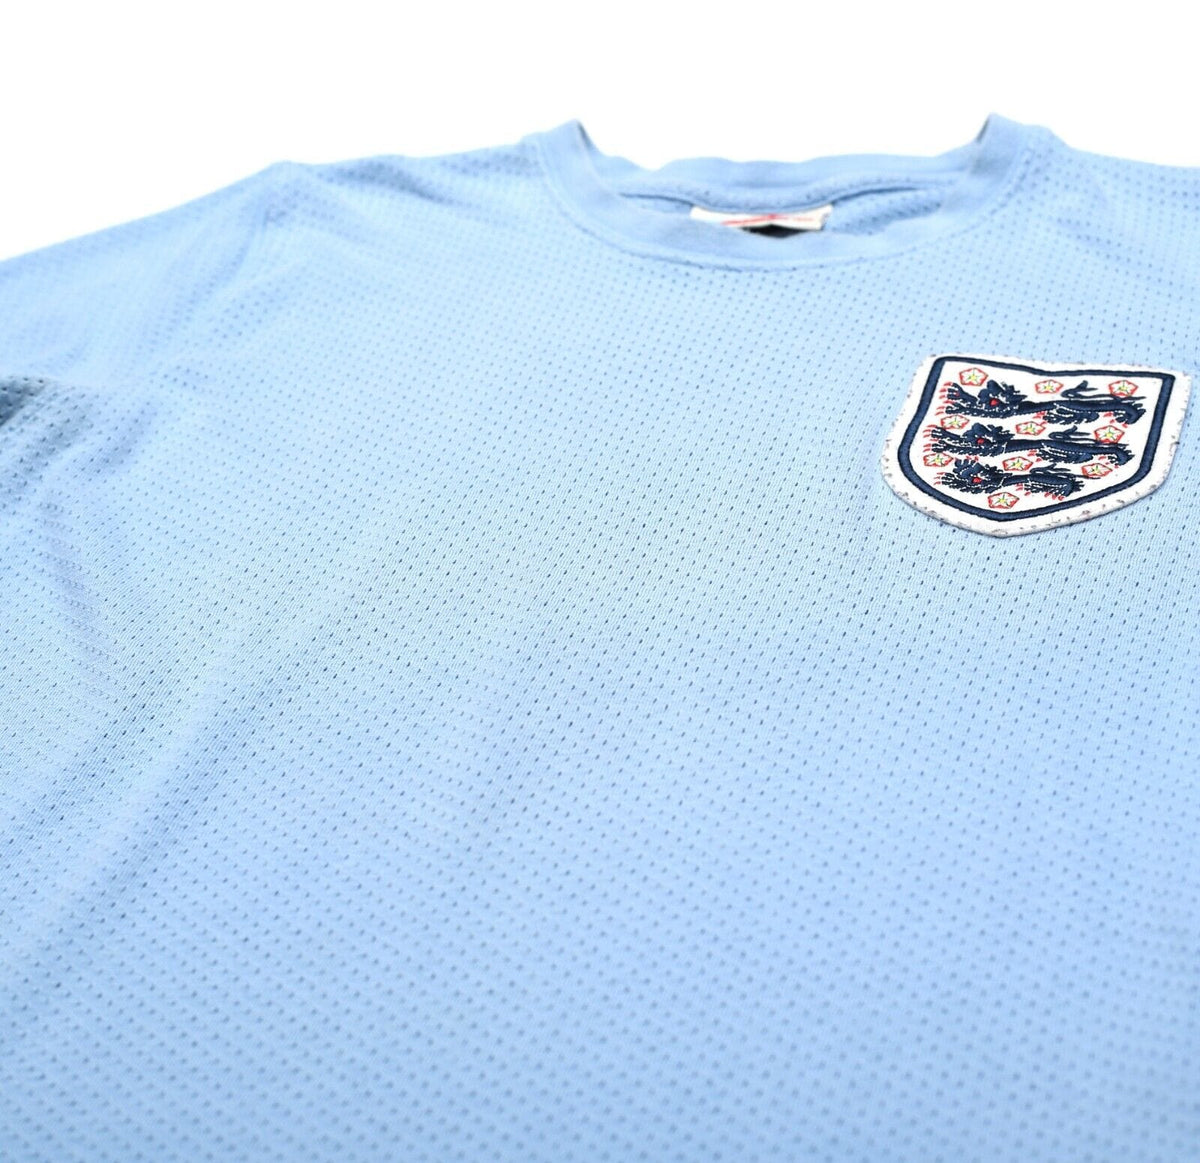 England Official Shirts - Vintage & Clearance Kit